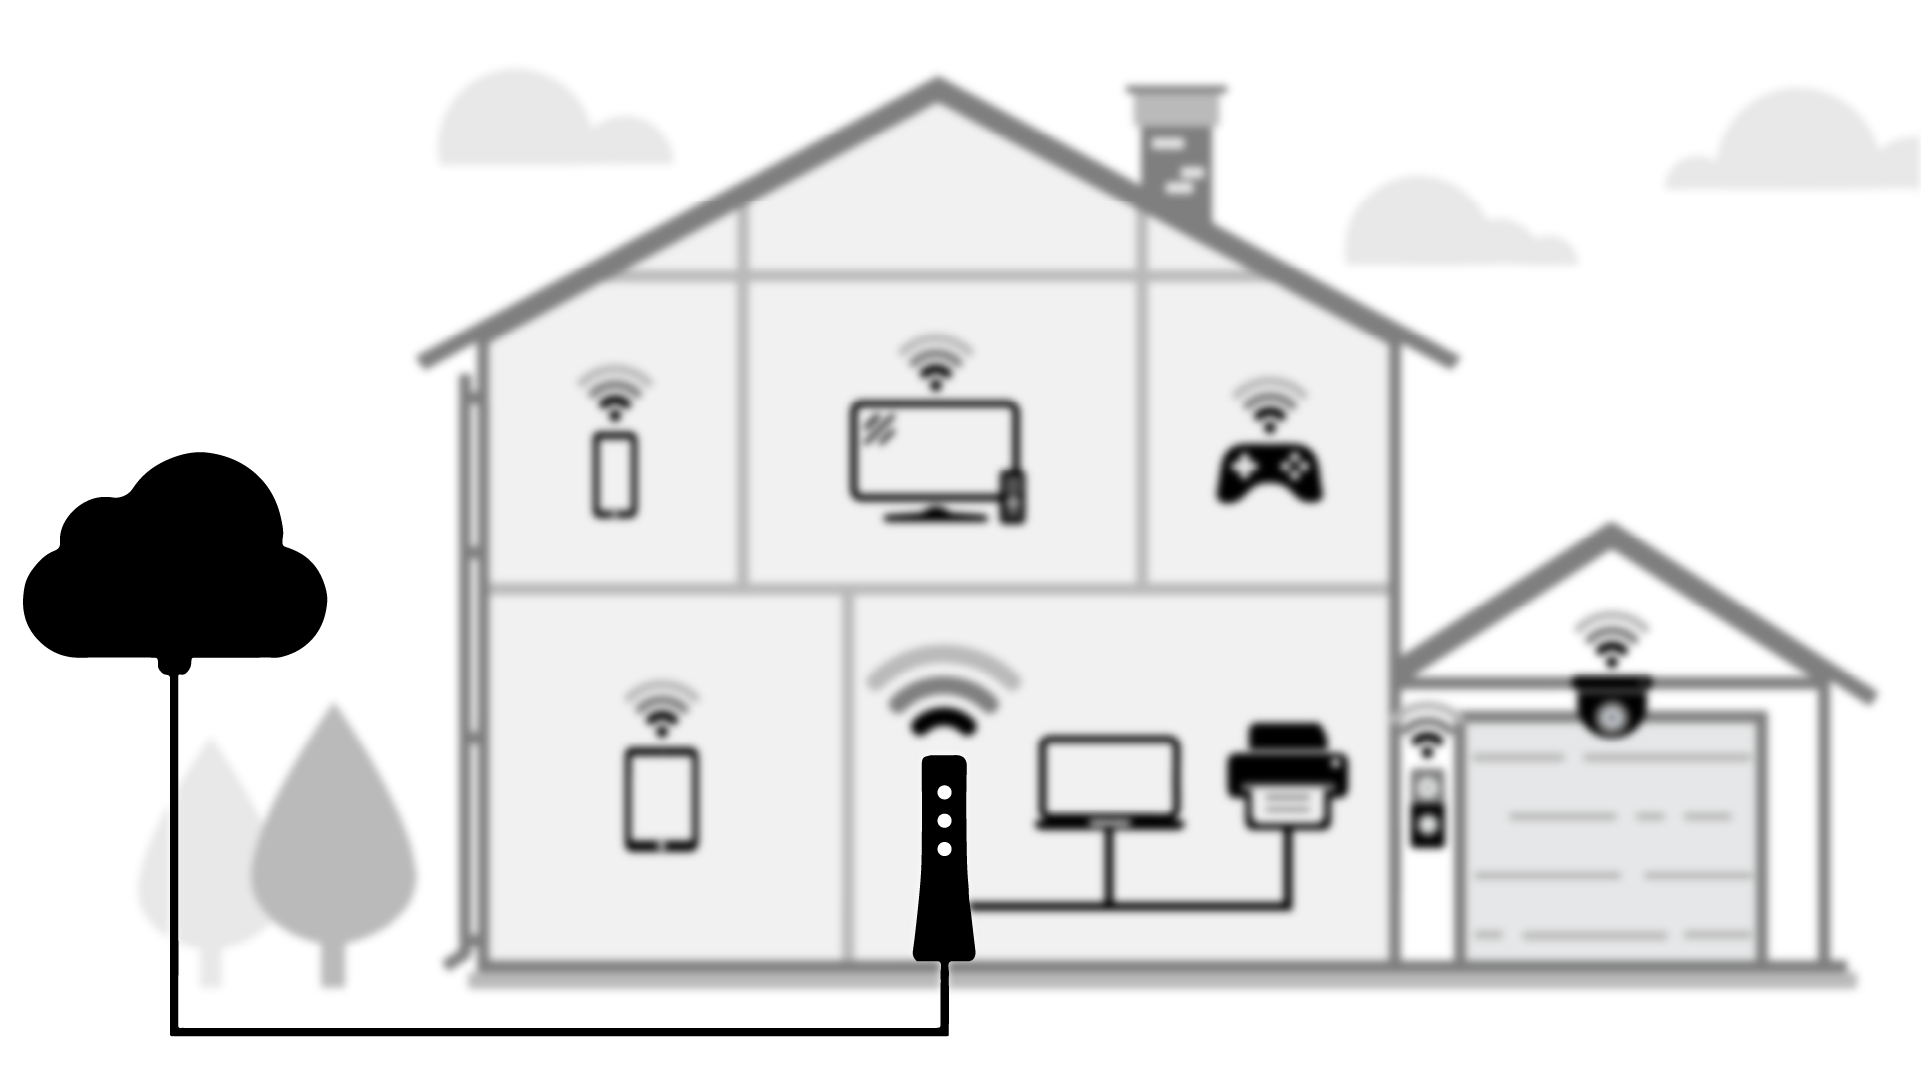 An illustrated diagram showing network speed from a home or building 